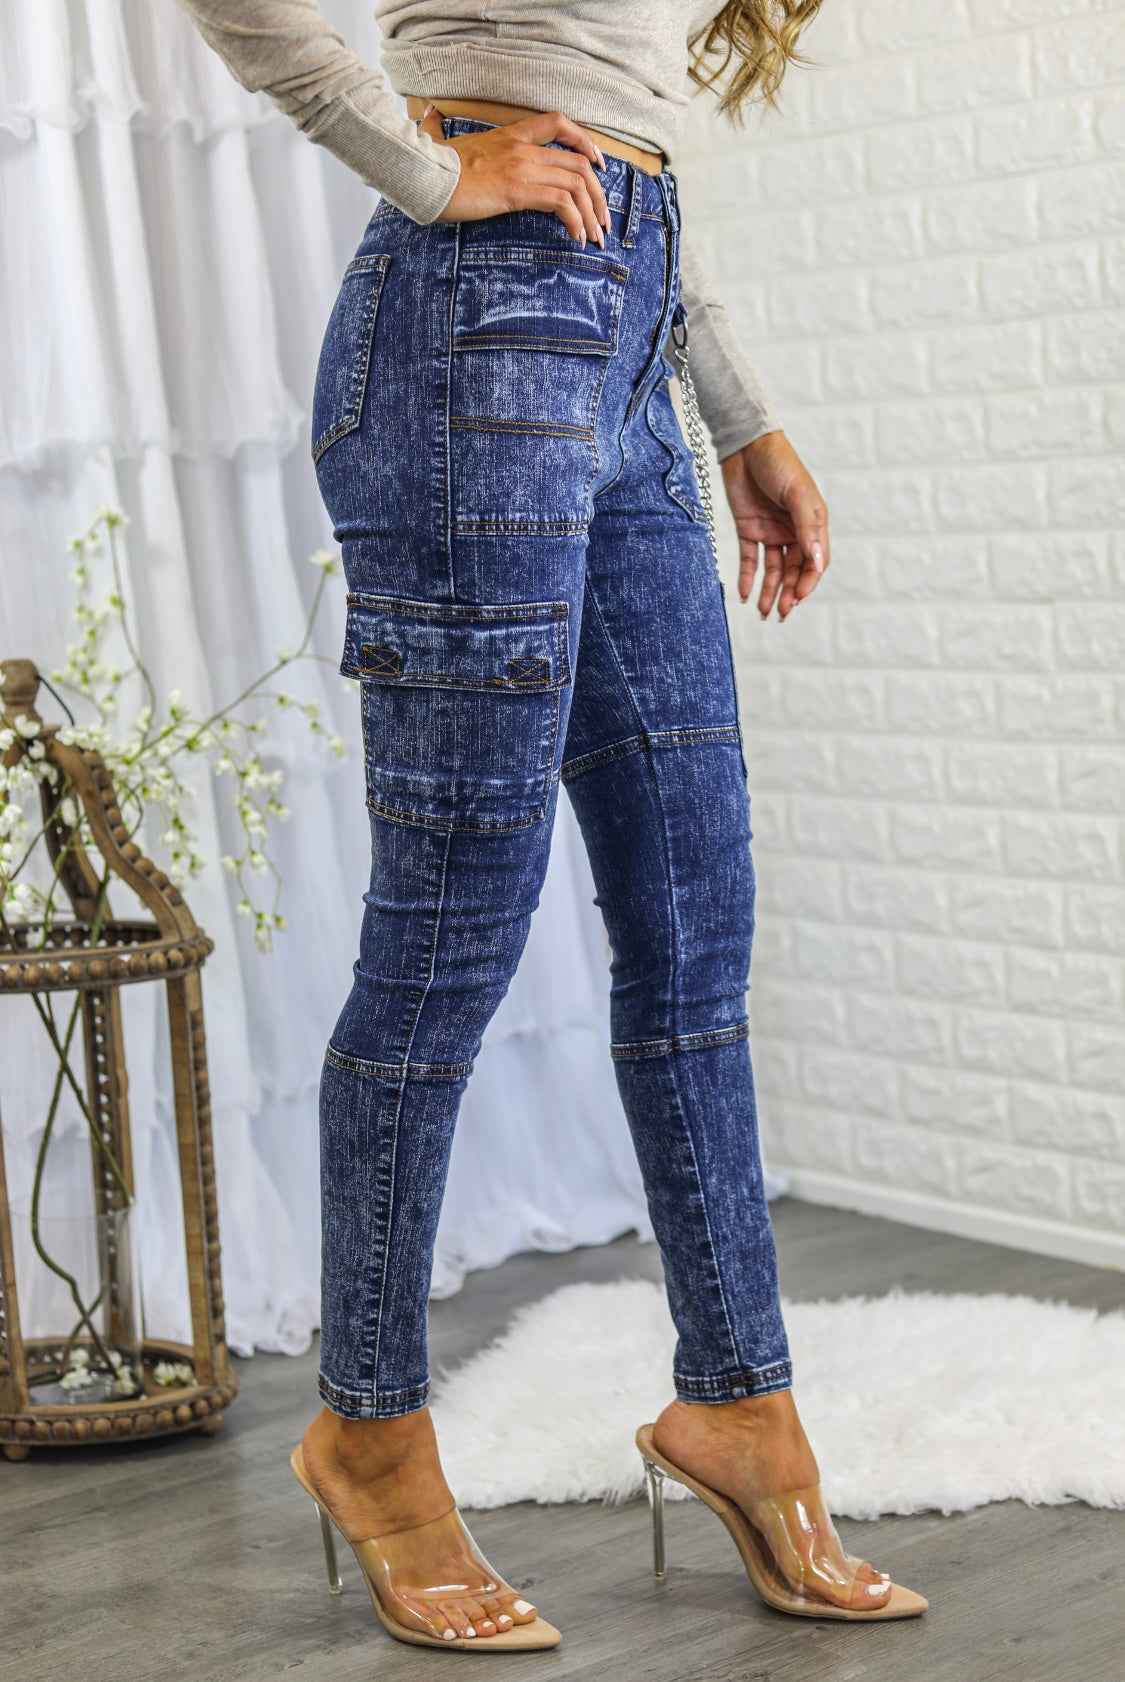 Mineral Wash High Waisted Cargo Style Skinny Jeans